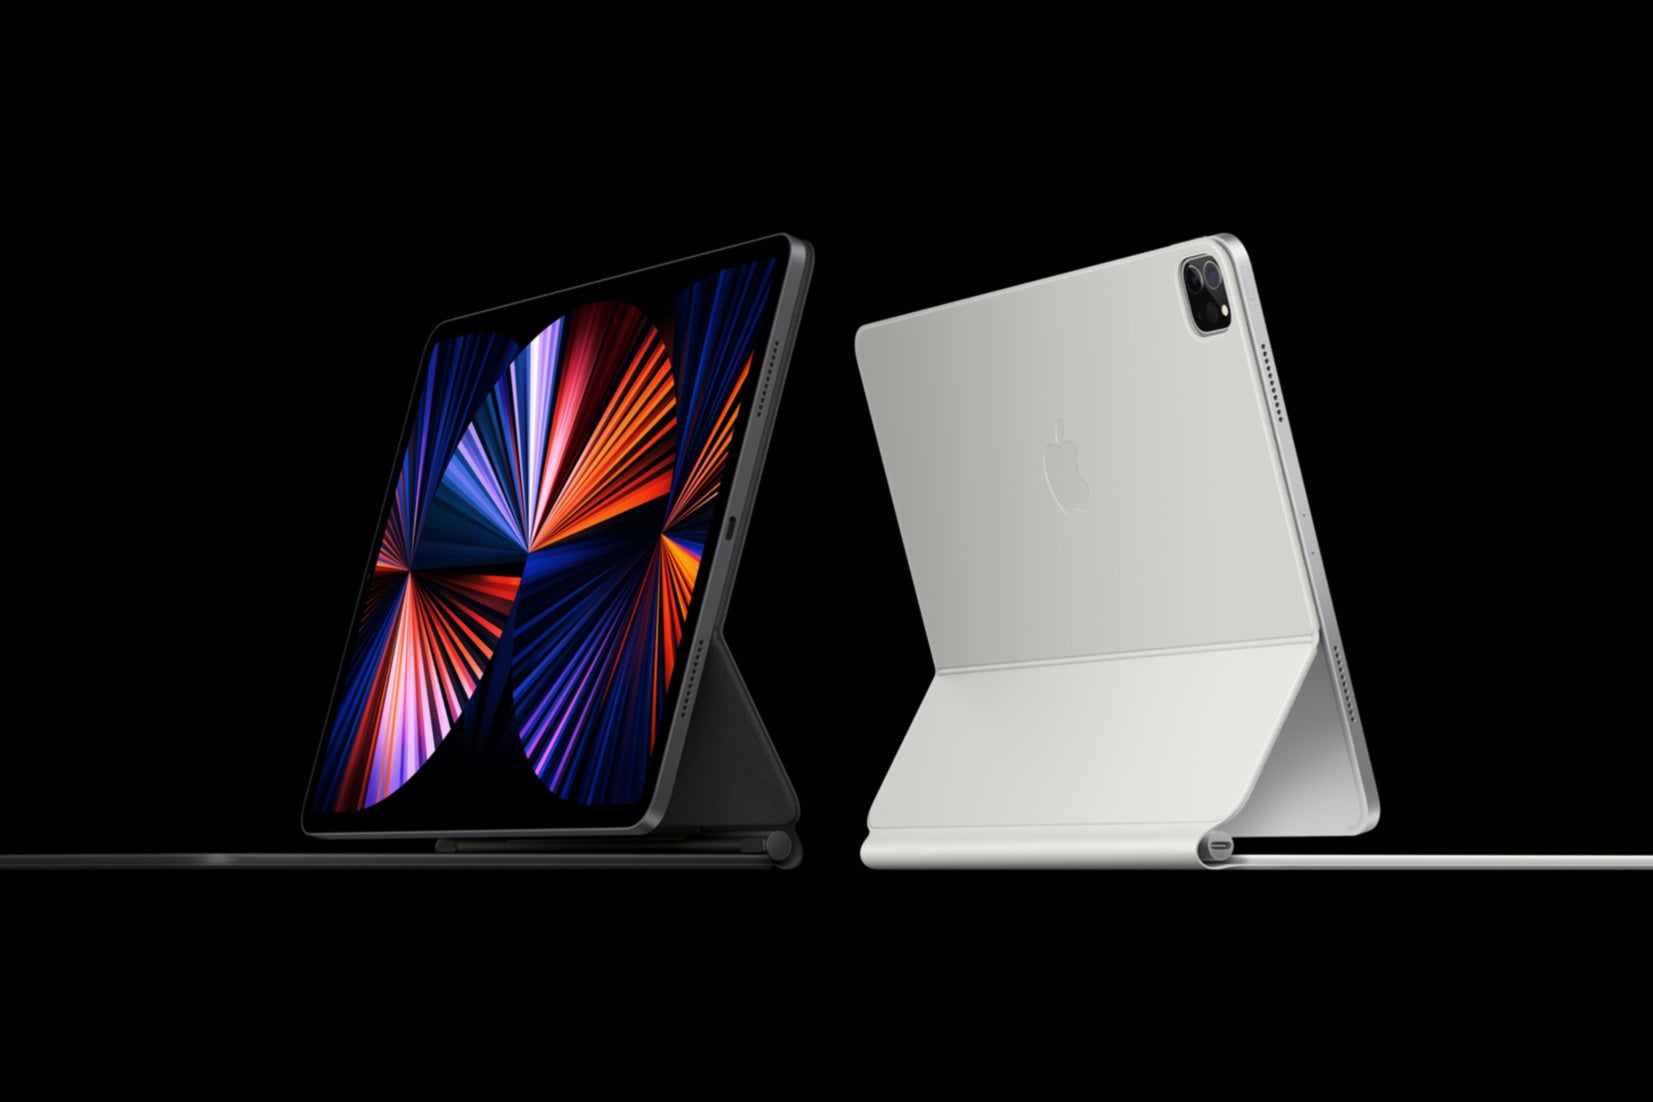 iPad Pro 2021 with the Magic Keyboard - iPad Pro (2021) colors: Silver vs Space Gray